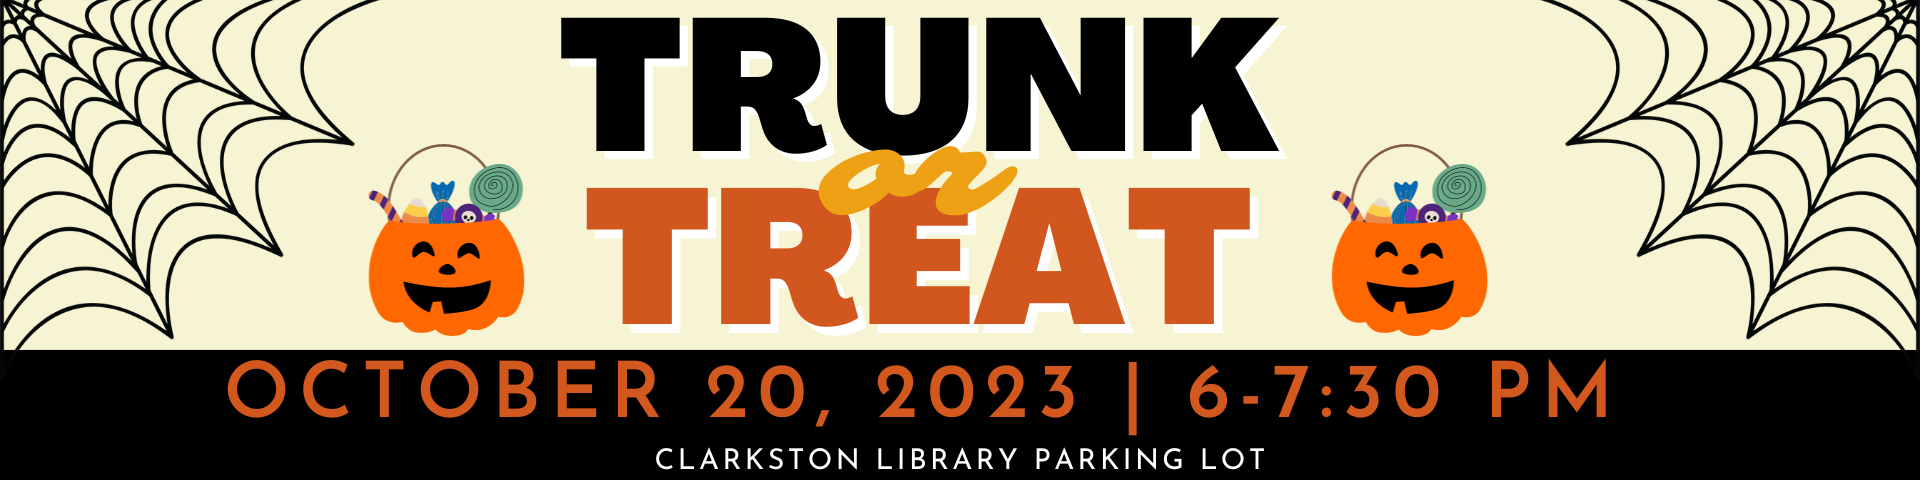 Trunk or Treat October 20, 2023 6pm - 730PM Clarkston Library Parking Lot